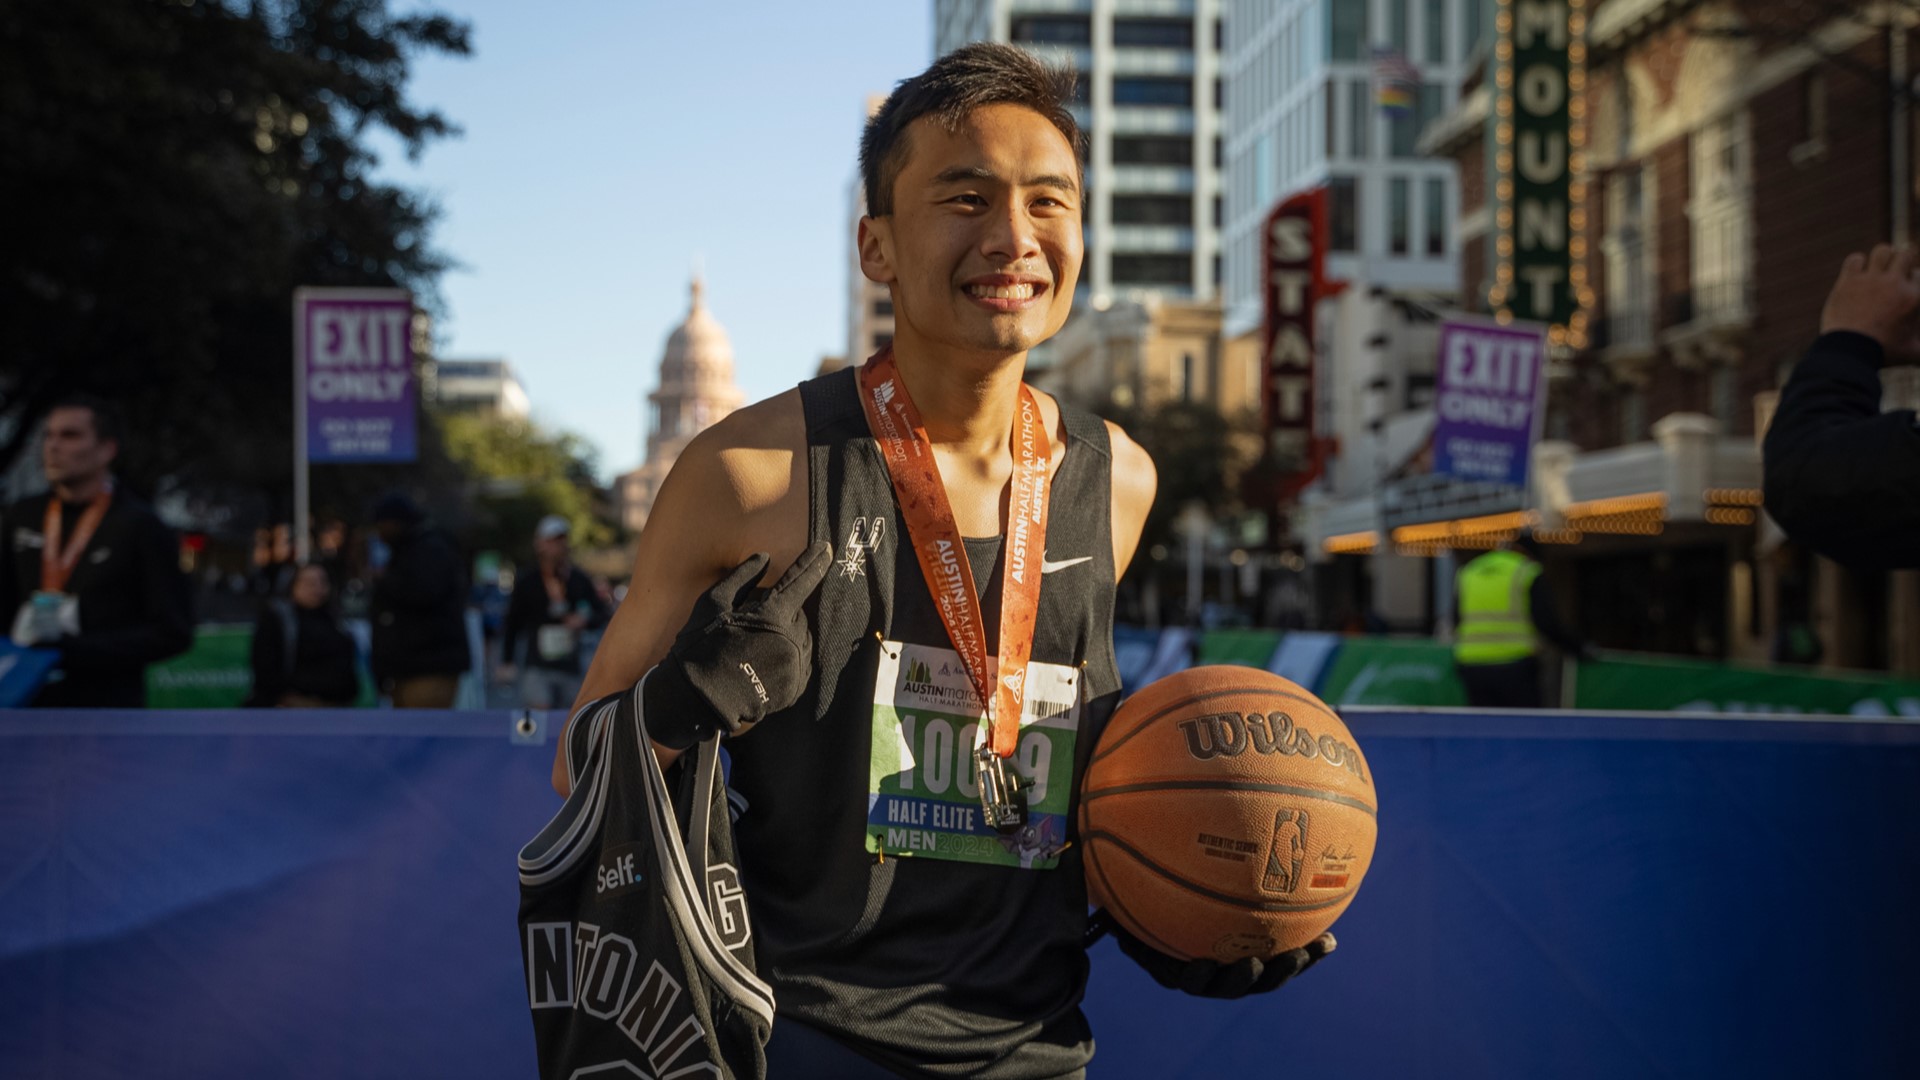 Ben Duong broke the previous record by more than three minutes.